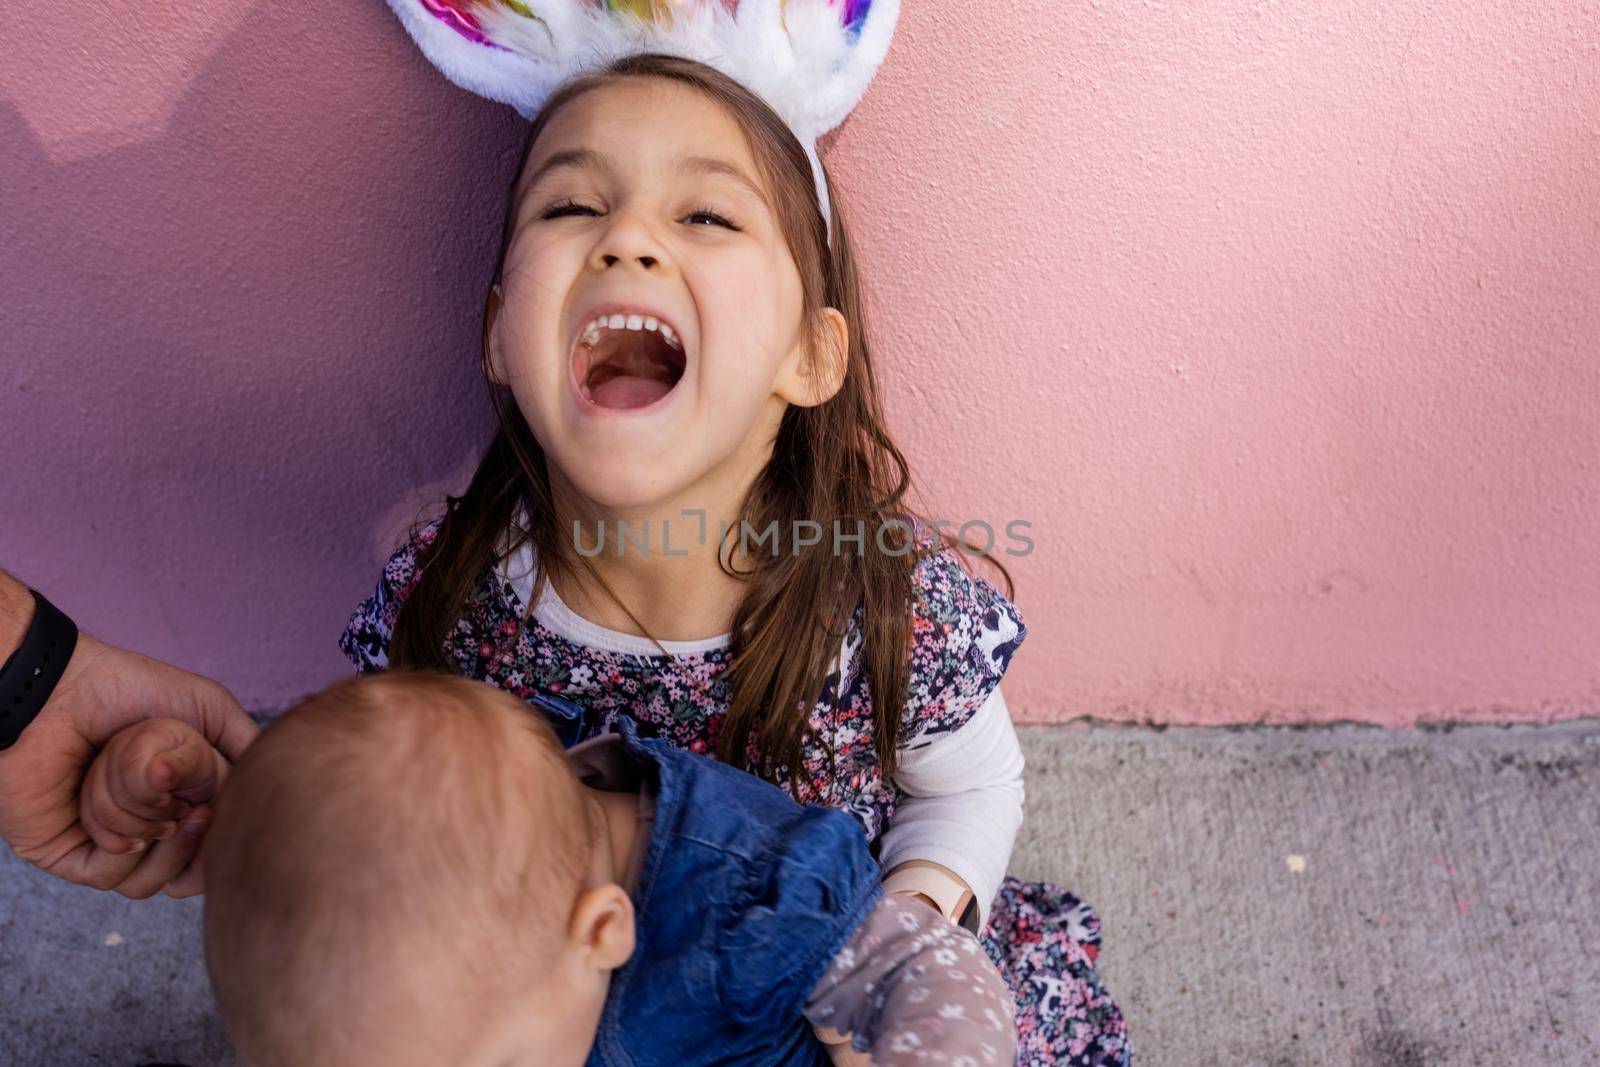 Adorable little girl wearing unicorn headband hugging and kissing a baby by Kanelbulle